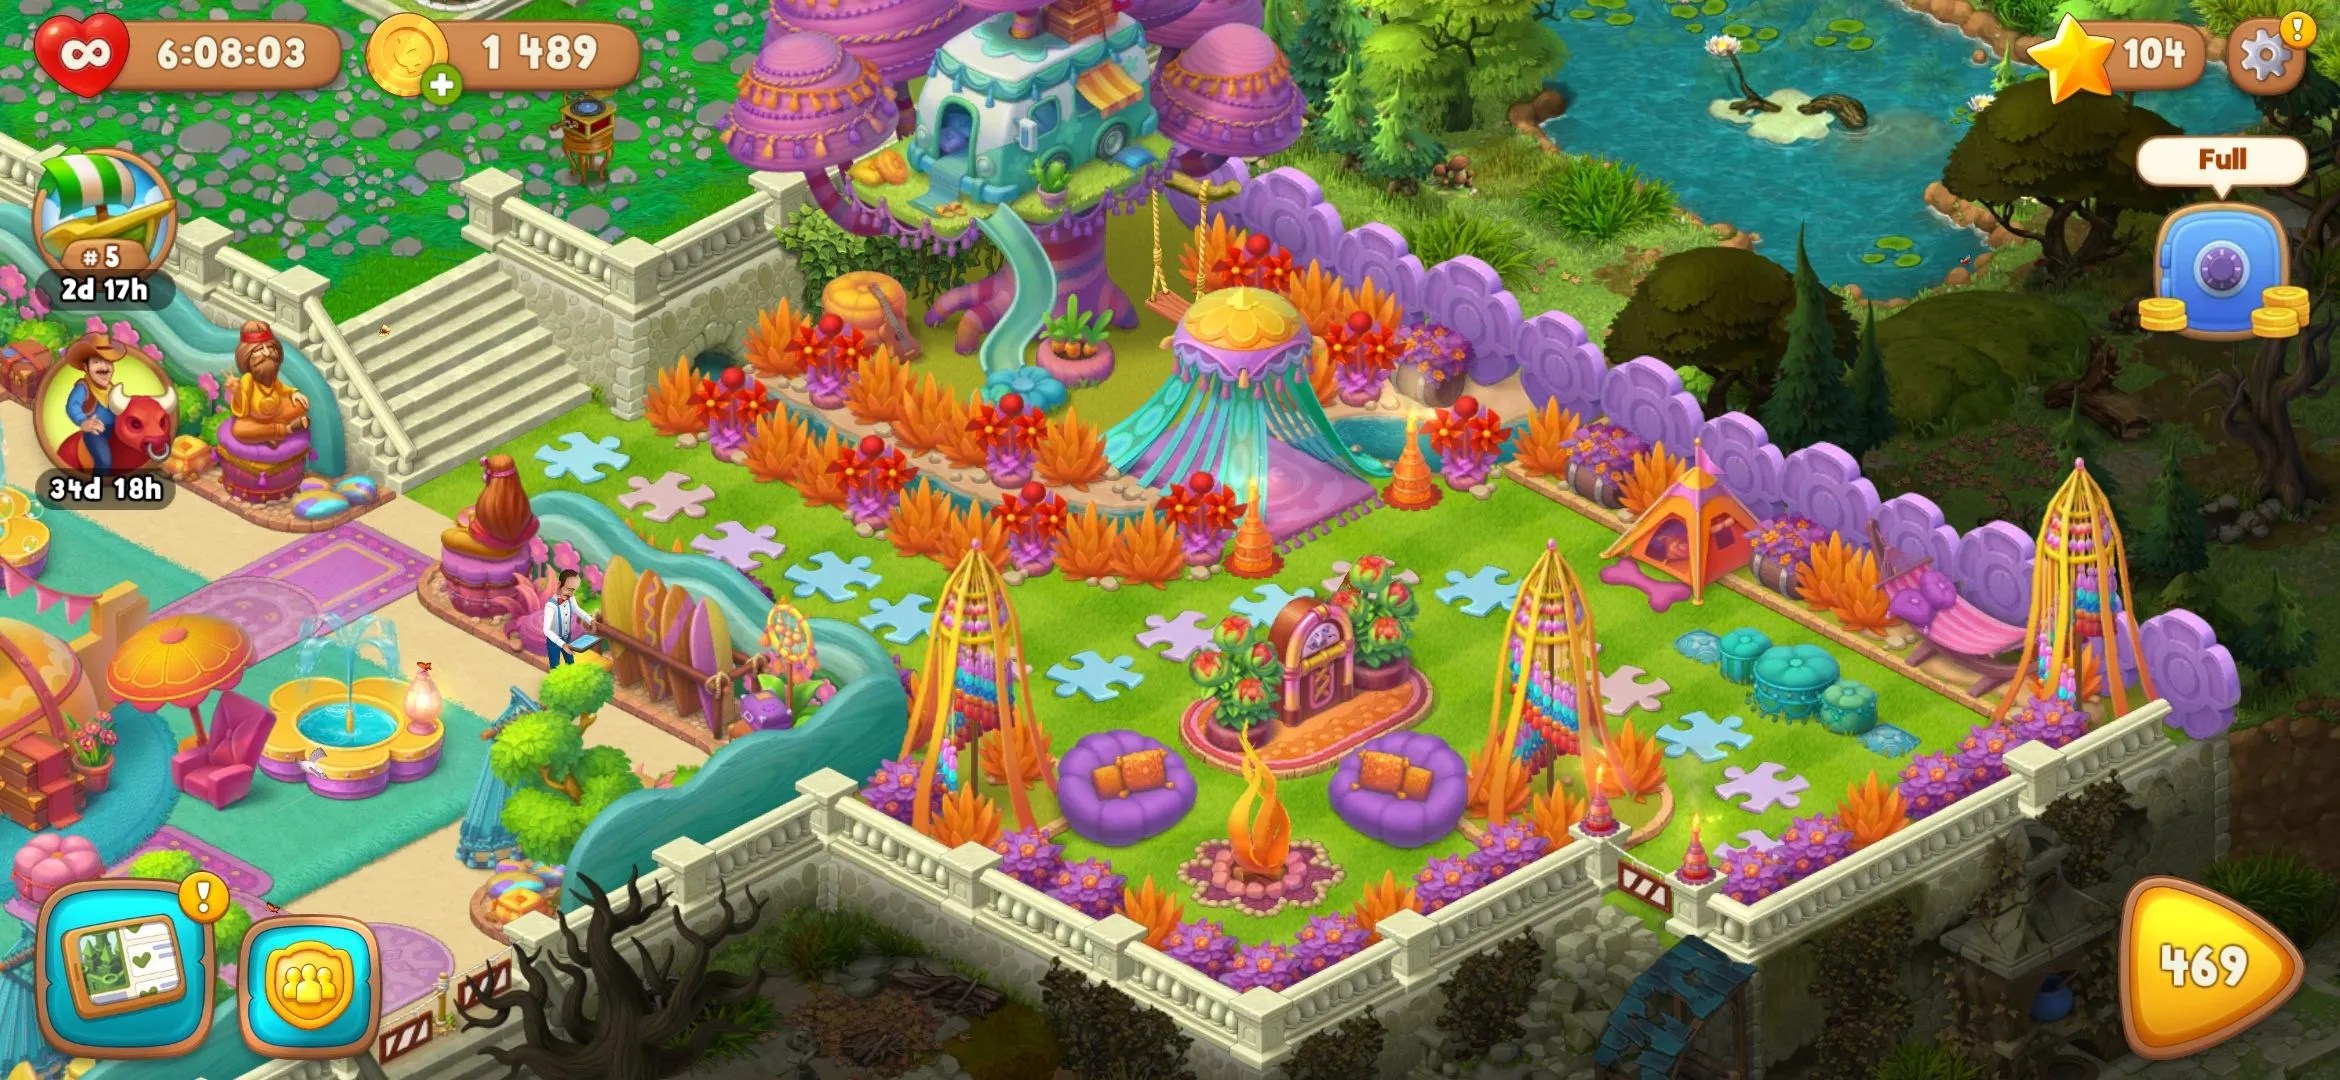 play gardenscapes game online free